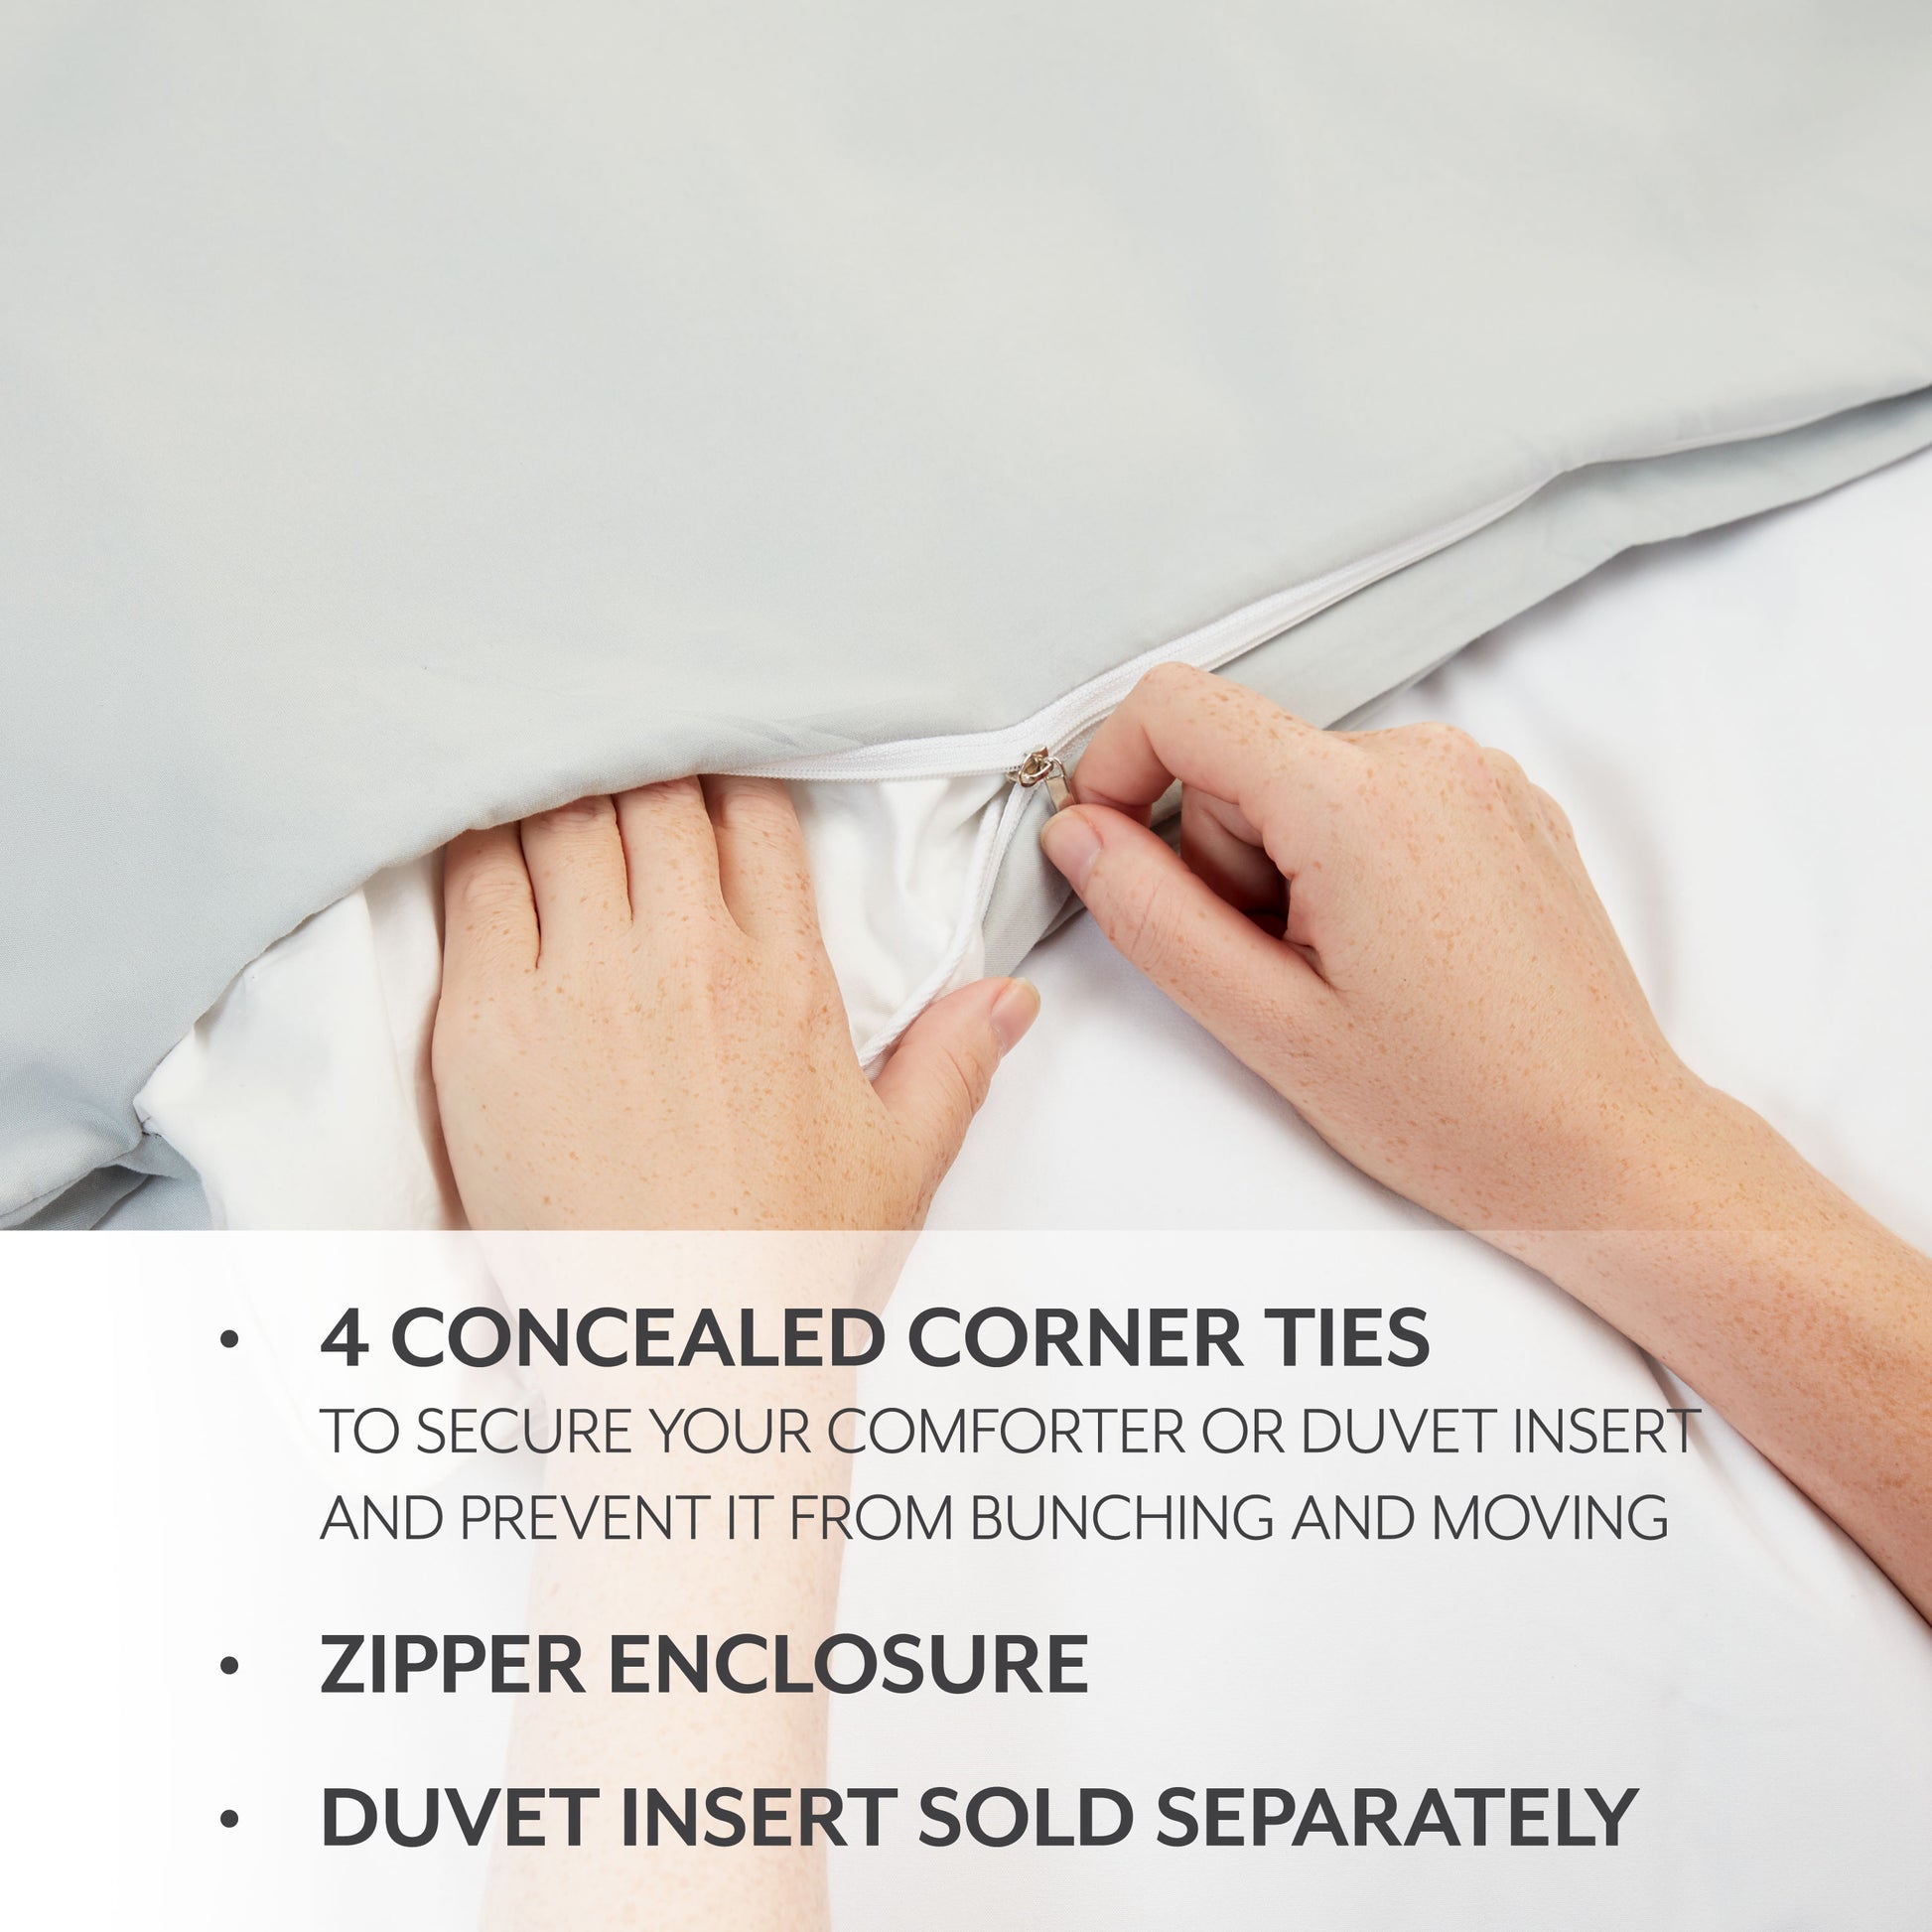 Solid Pinch-Pleat Duvet Cover